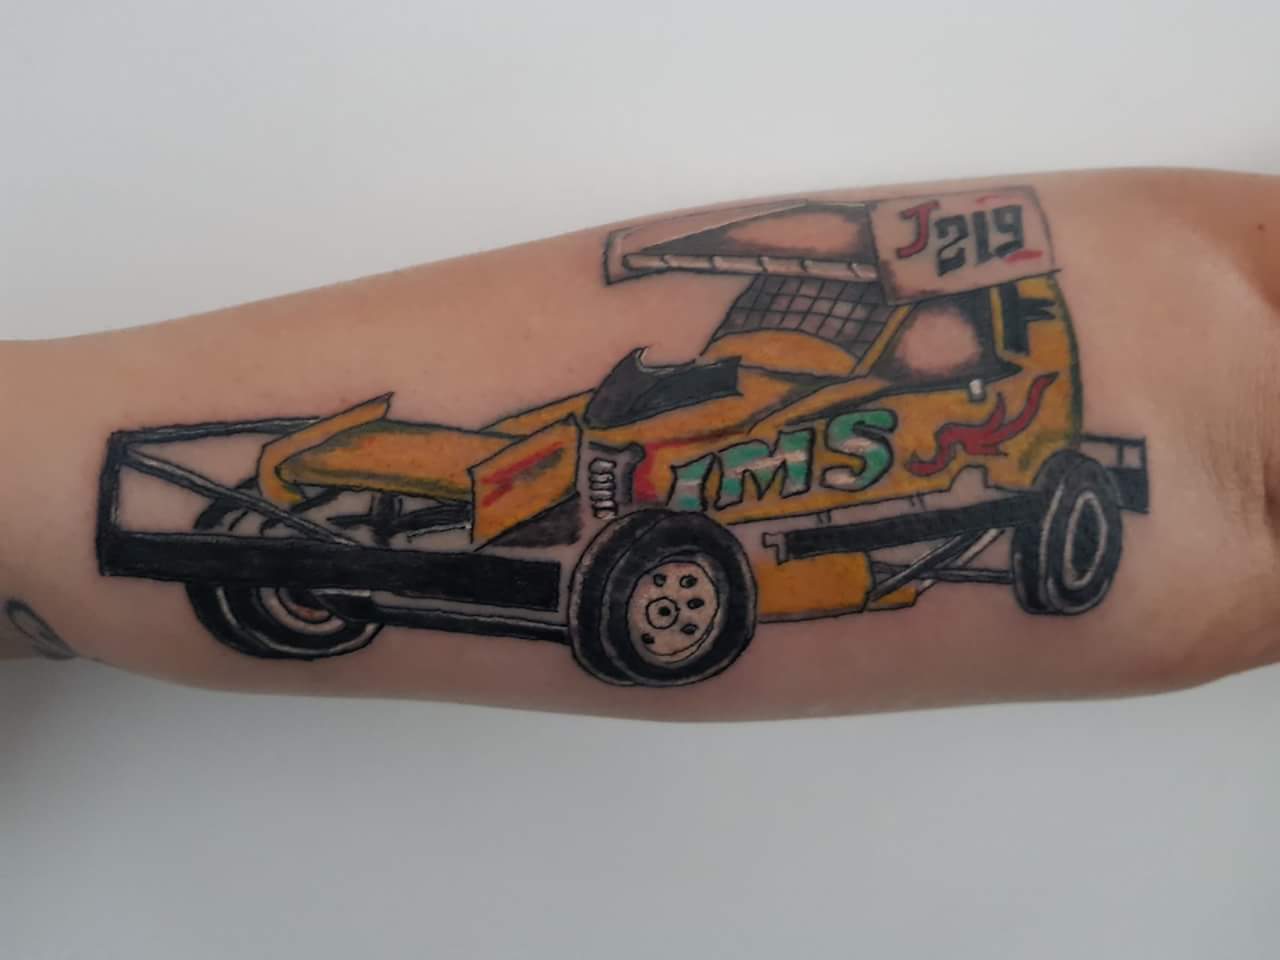 Wooden toy car tattoo on inner arm